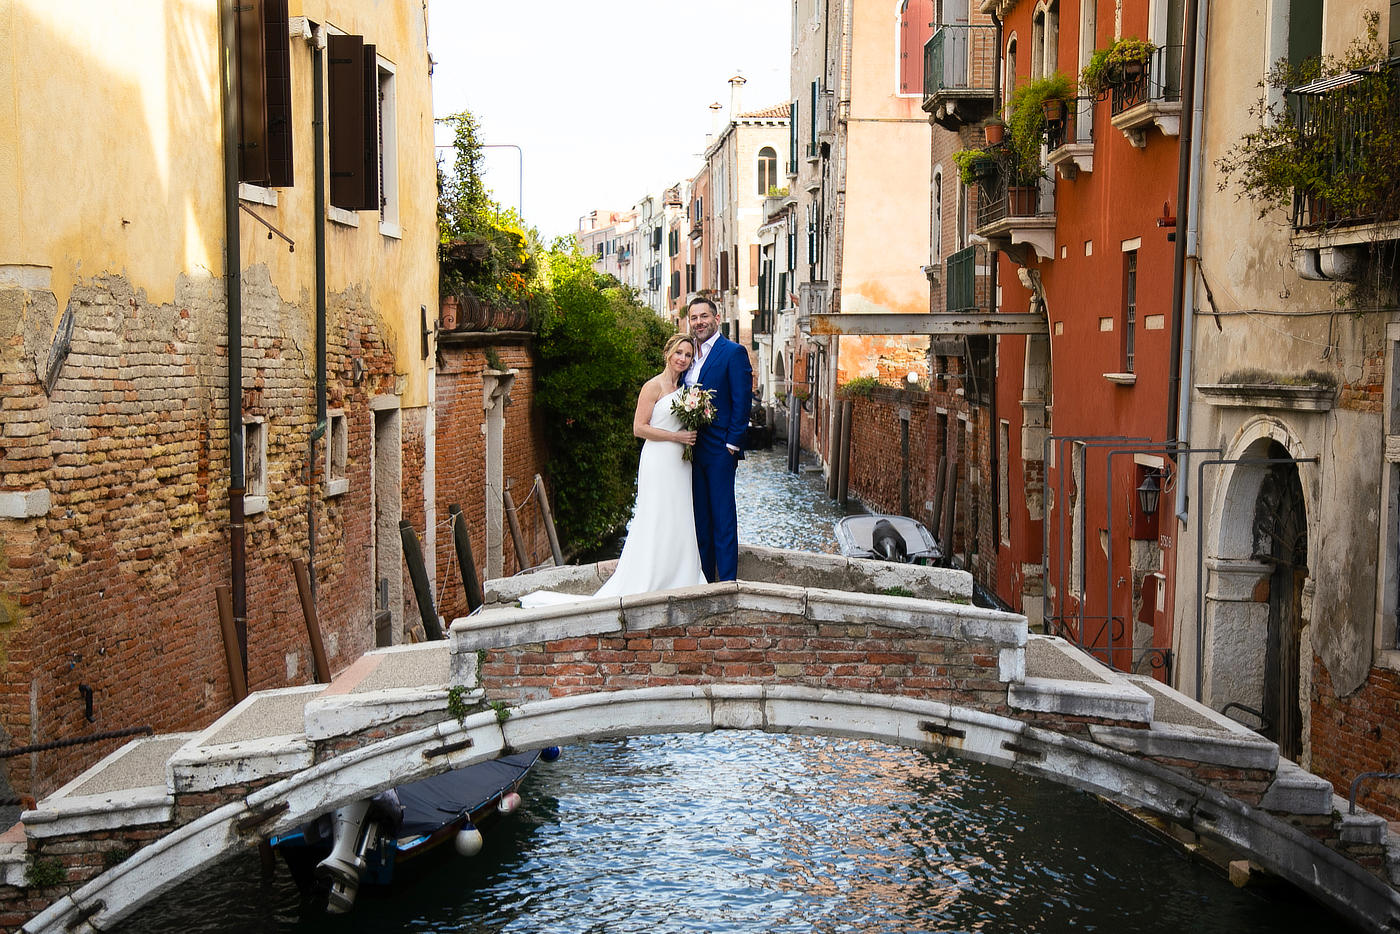 This tiny bridge is perfect for a very intimate ceremony, the couple is posing for a photo